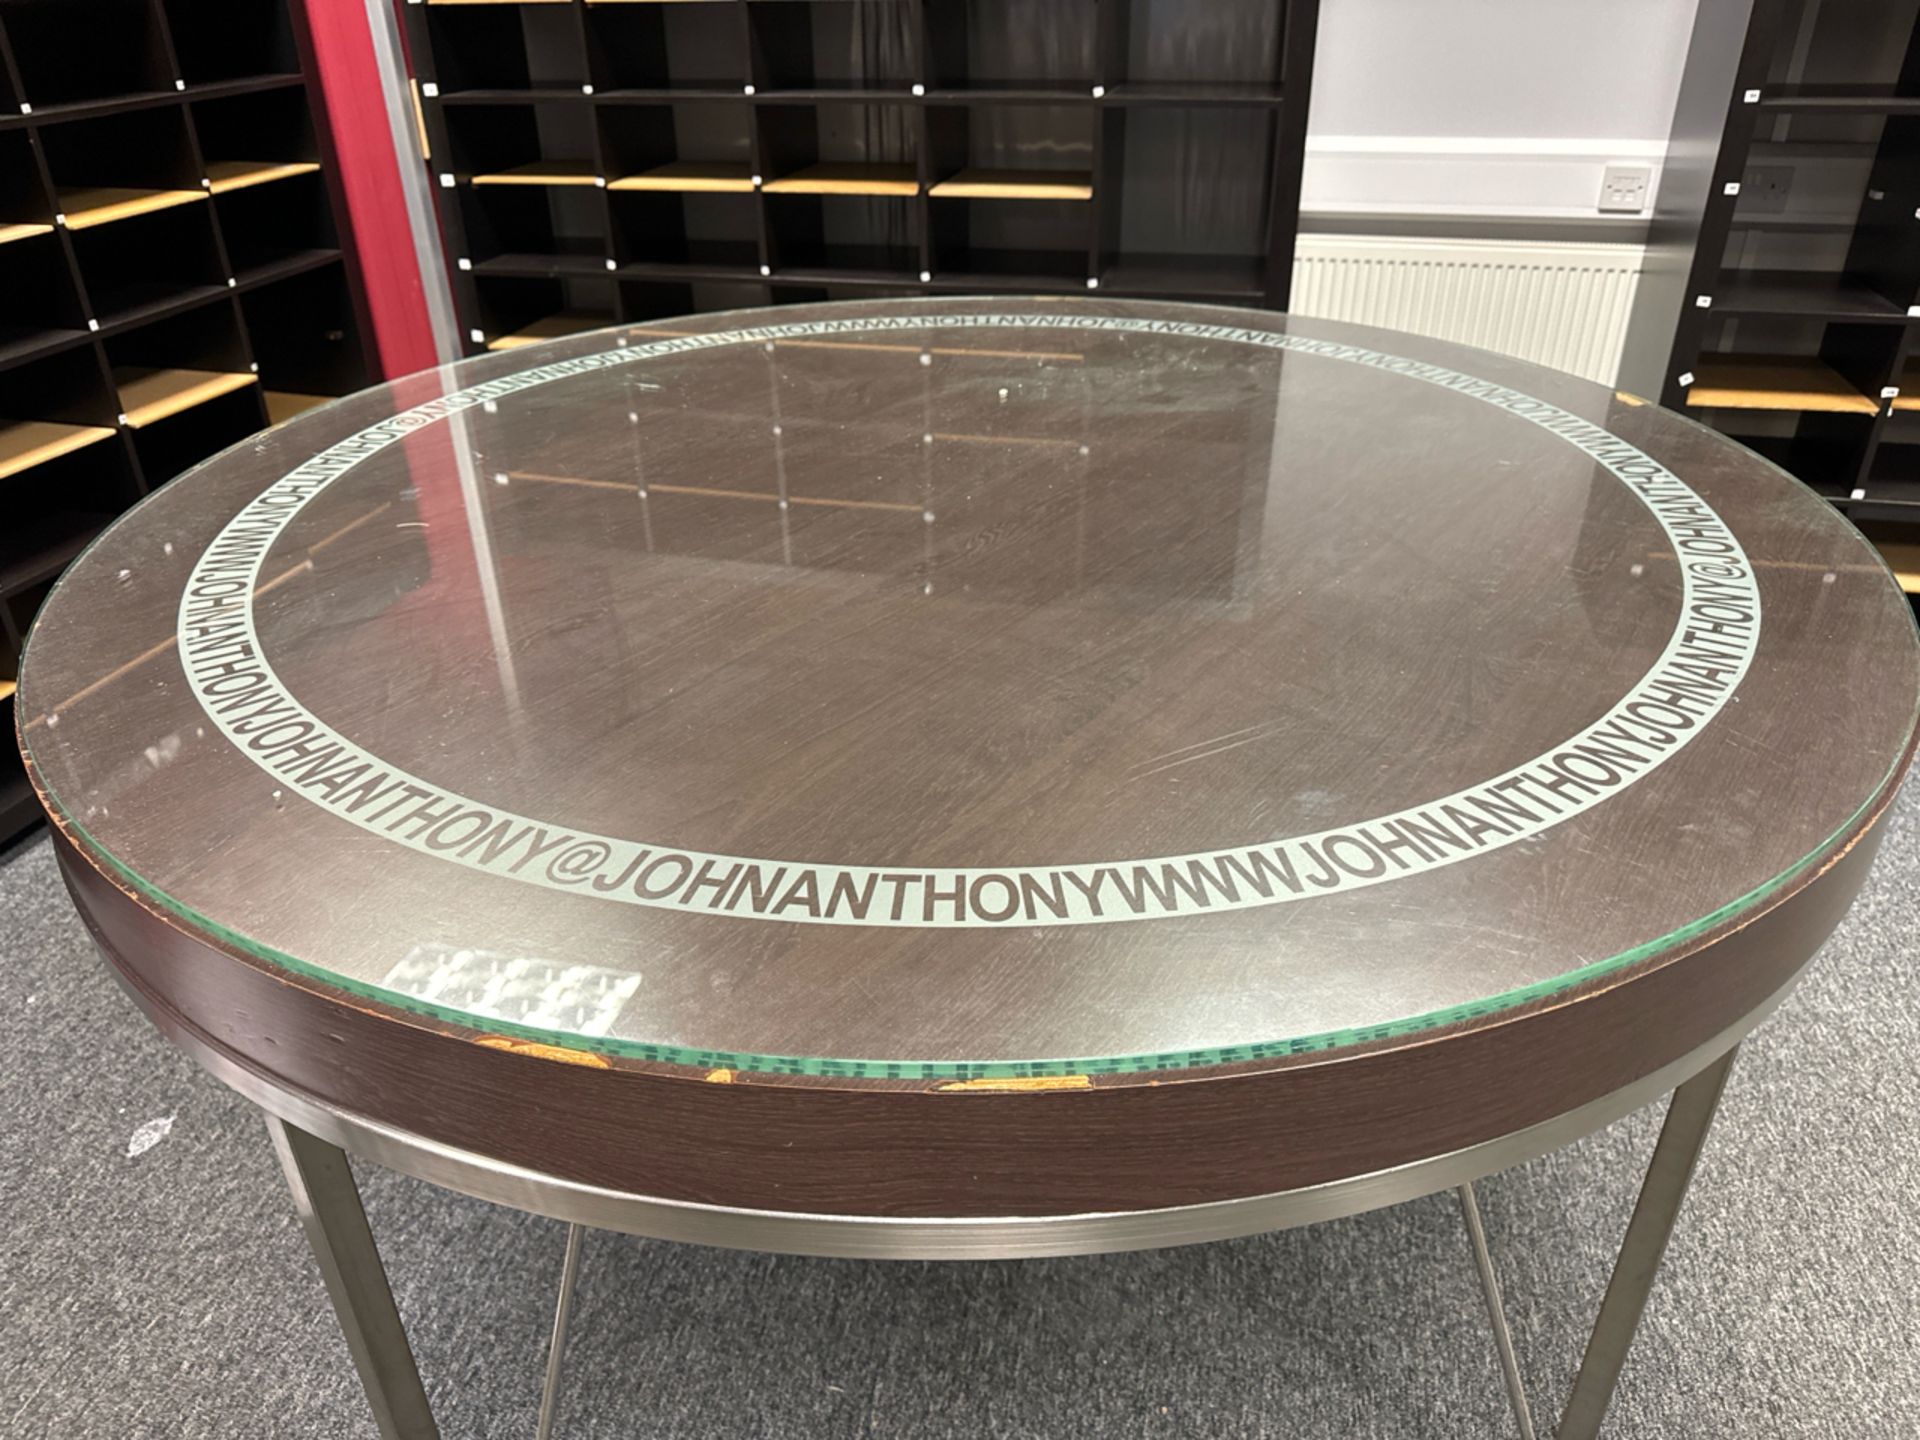 John Anthony Branded Circular Wood Table with Glass Top - Bild 2 aus 4